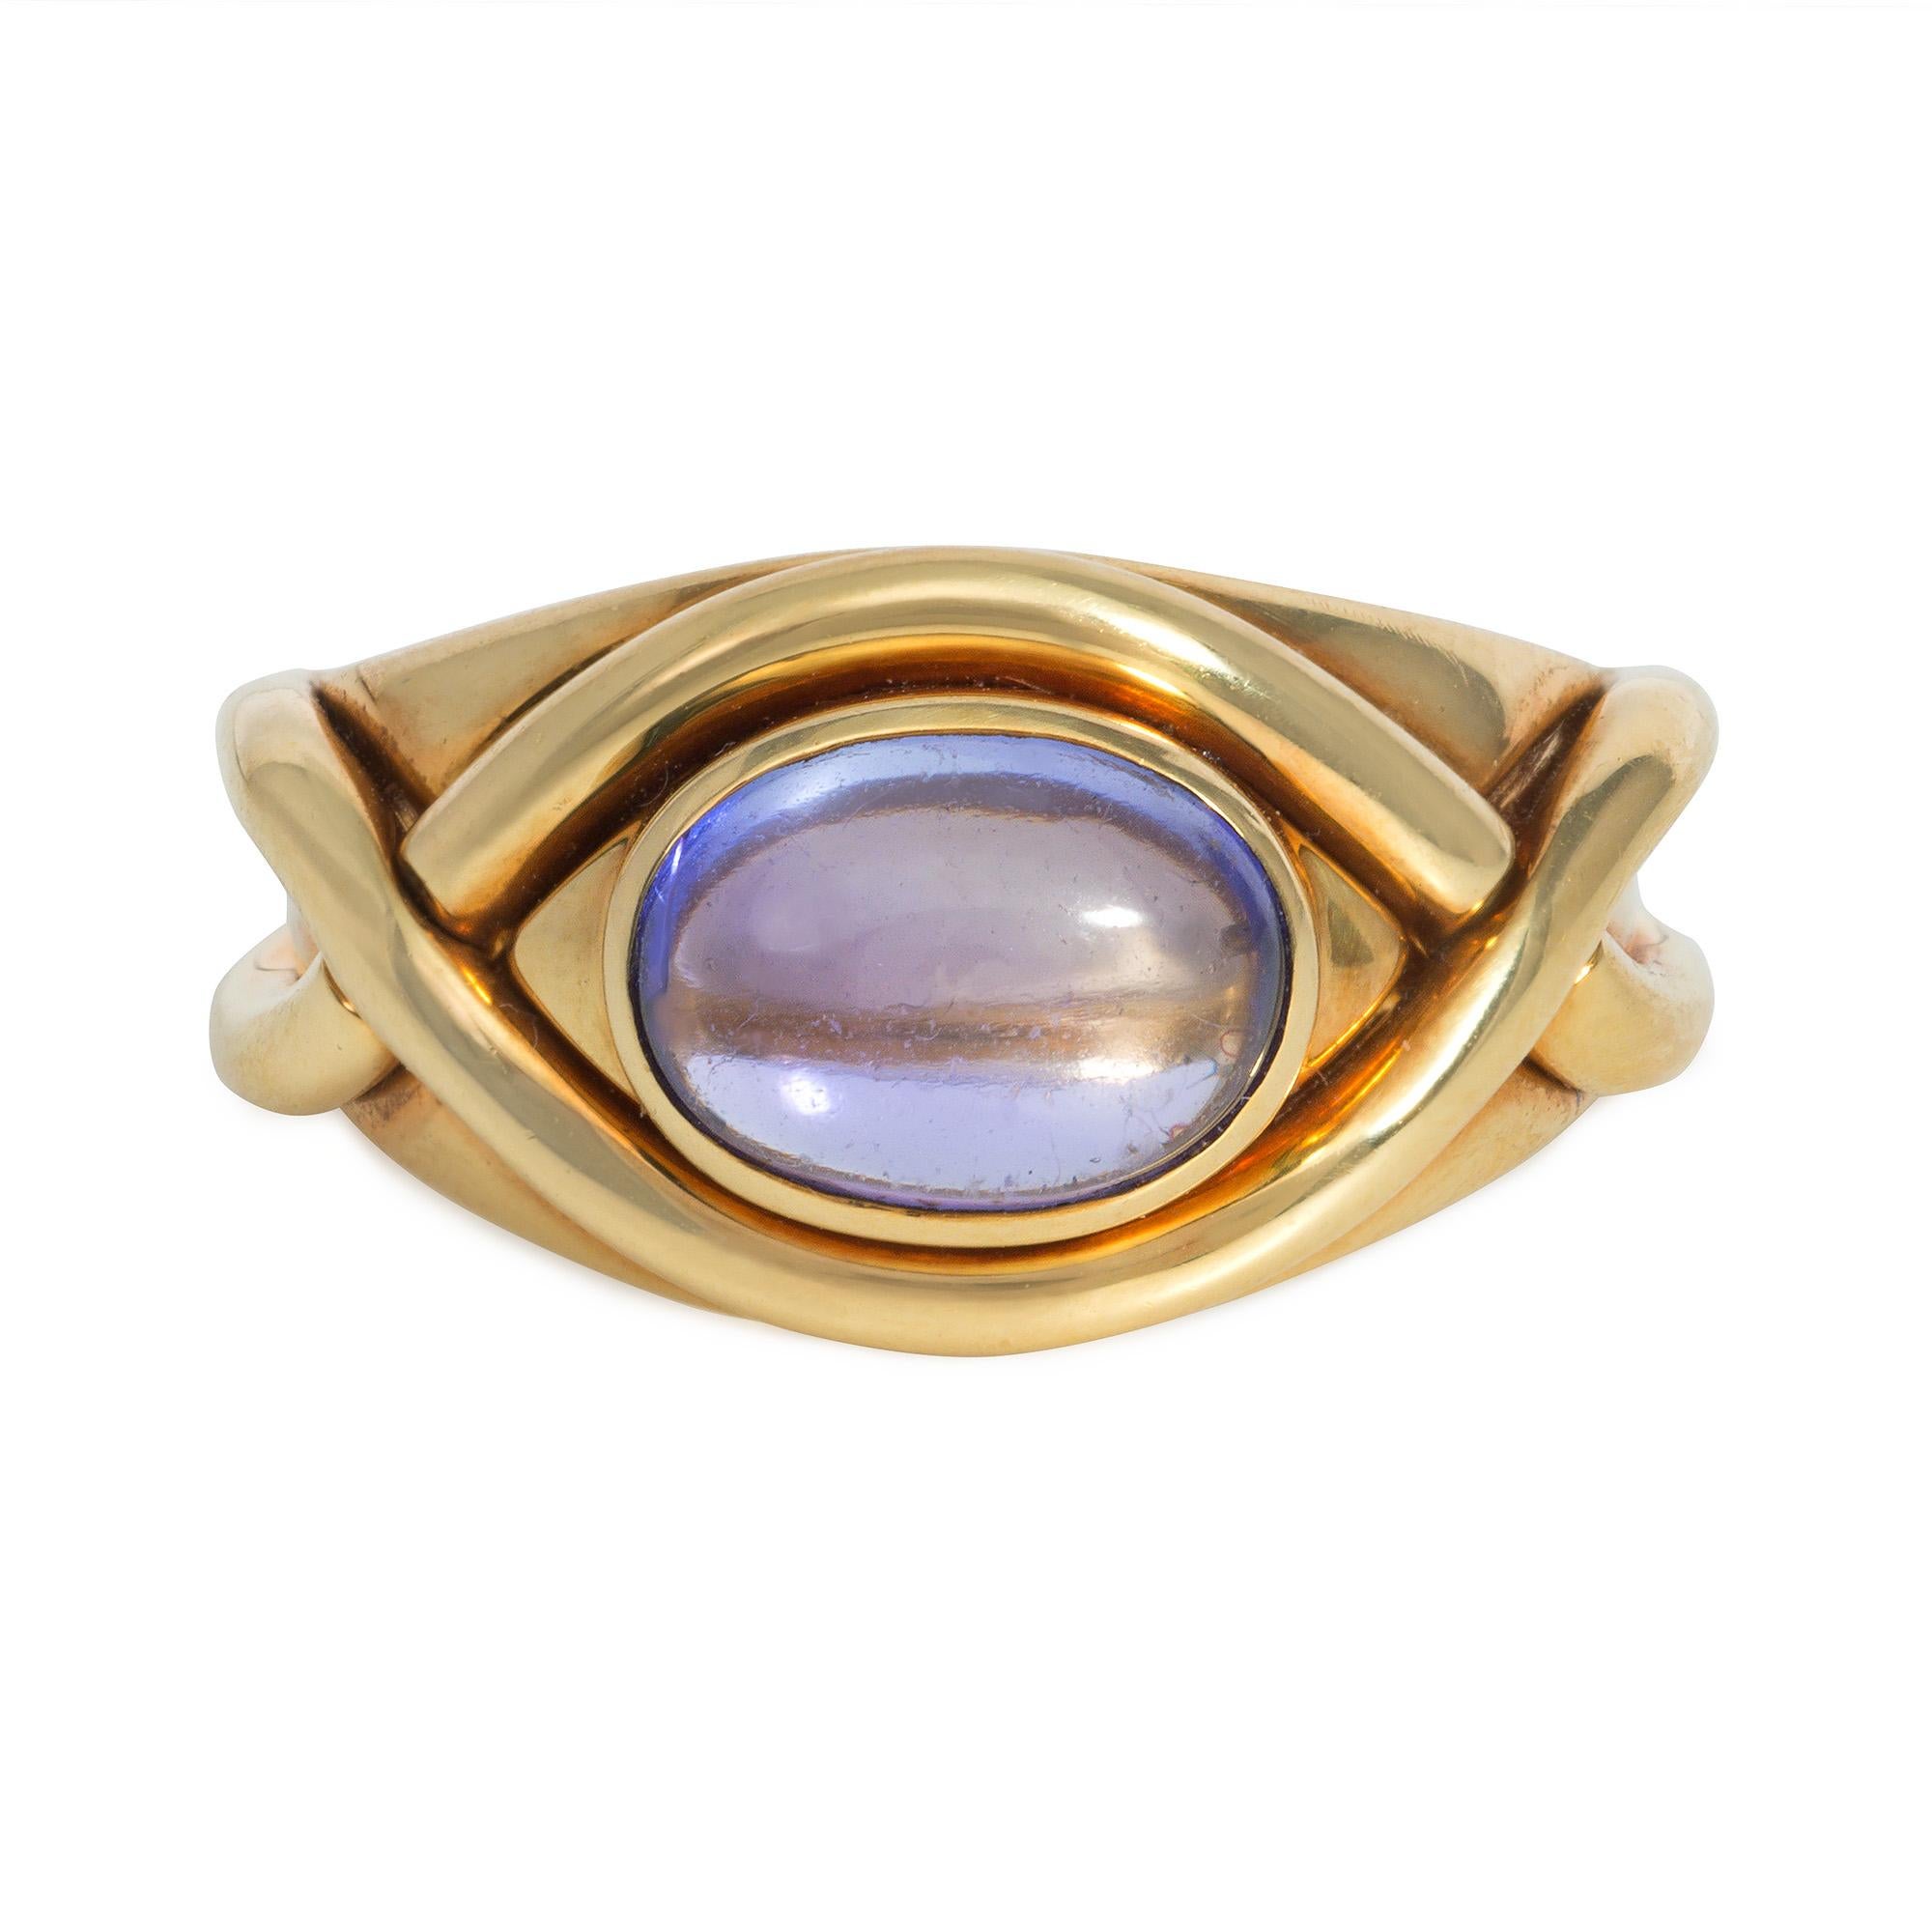 A gold and cabochon tanzanite ring decorated with two applied woven gold bands, in 18k.  Tiffany & Co.  Face up dimensions approximately 8mm x 14mm

Tiffany & Co. recognized tanzanite's potential to rival the more expensive sapphire and signed on to